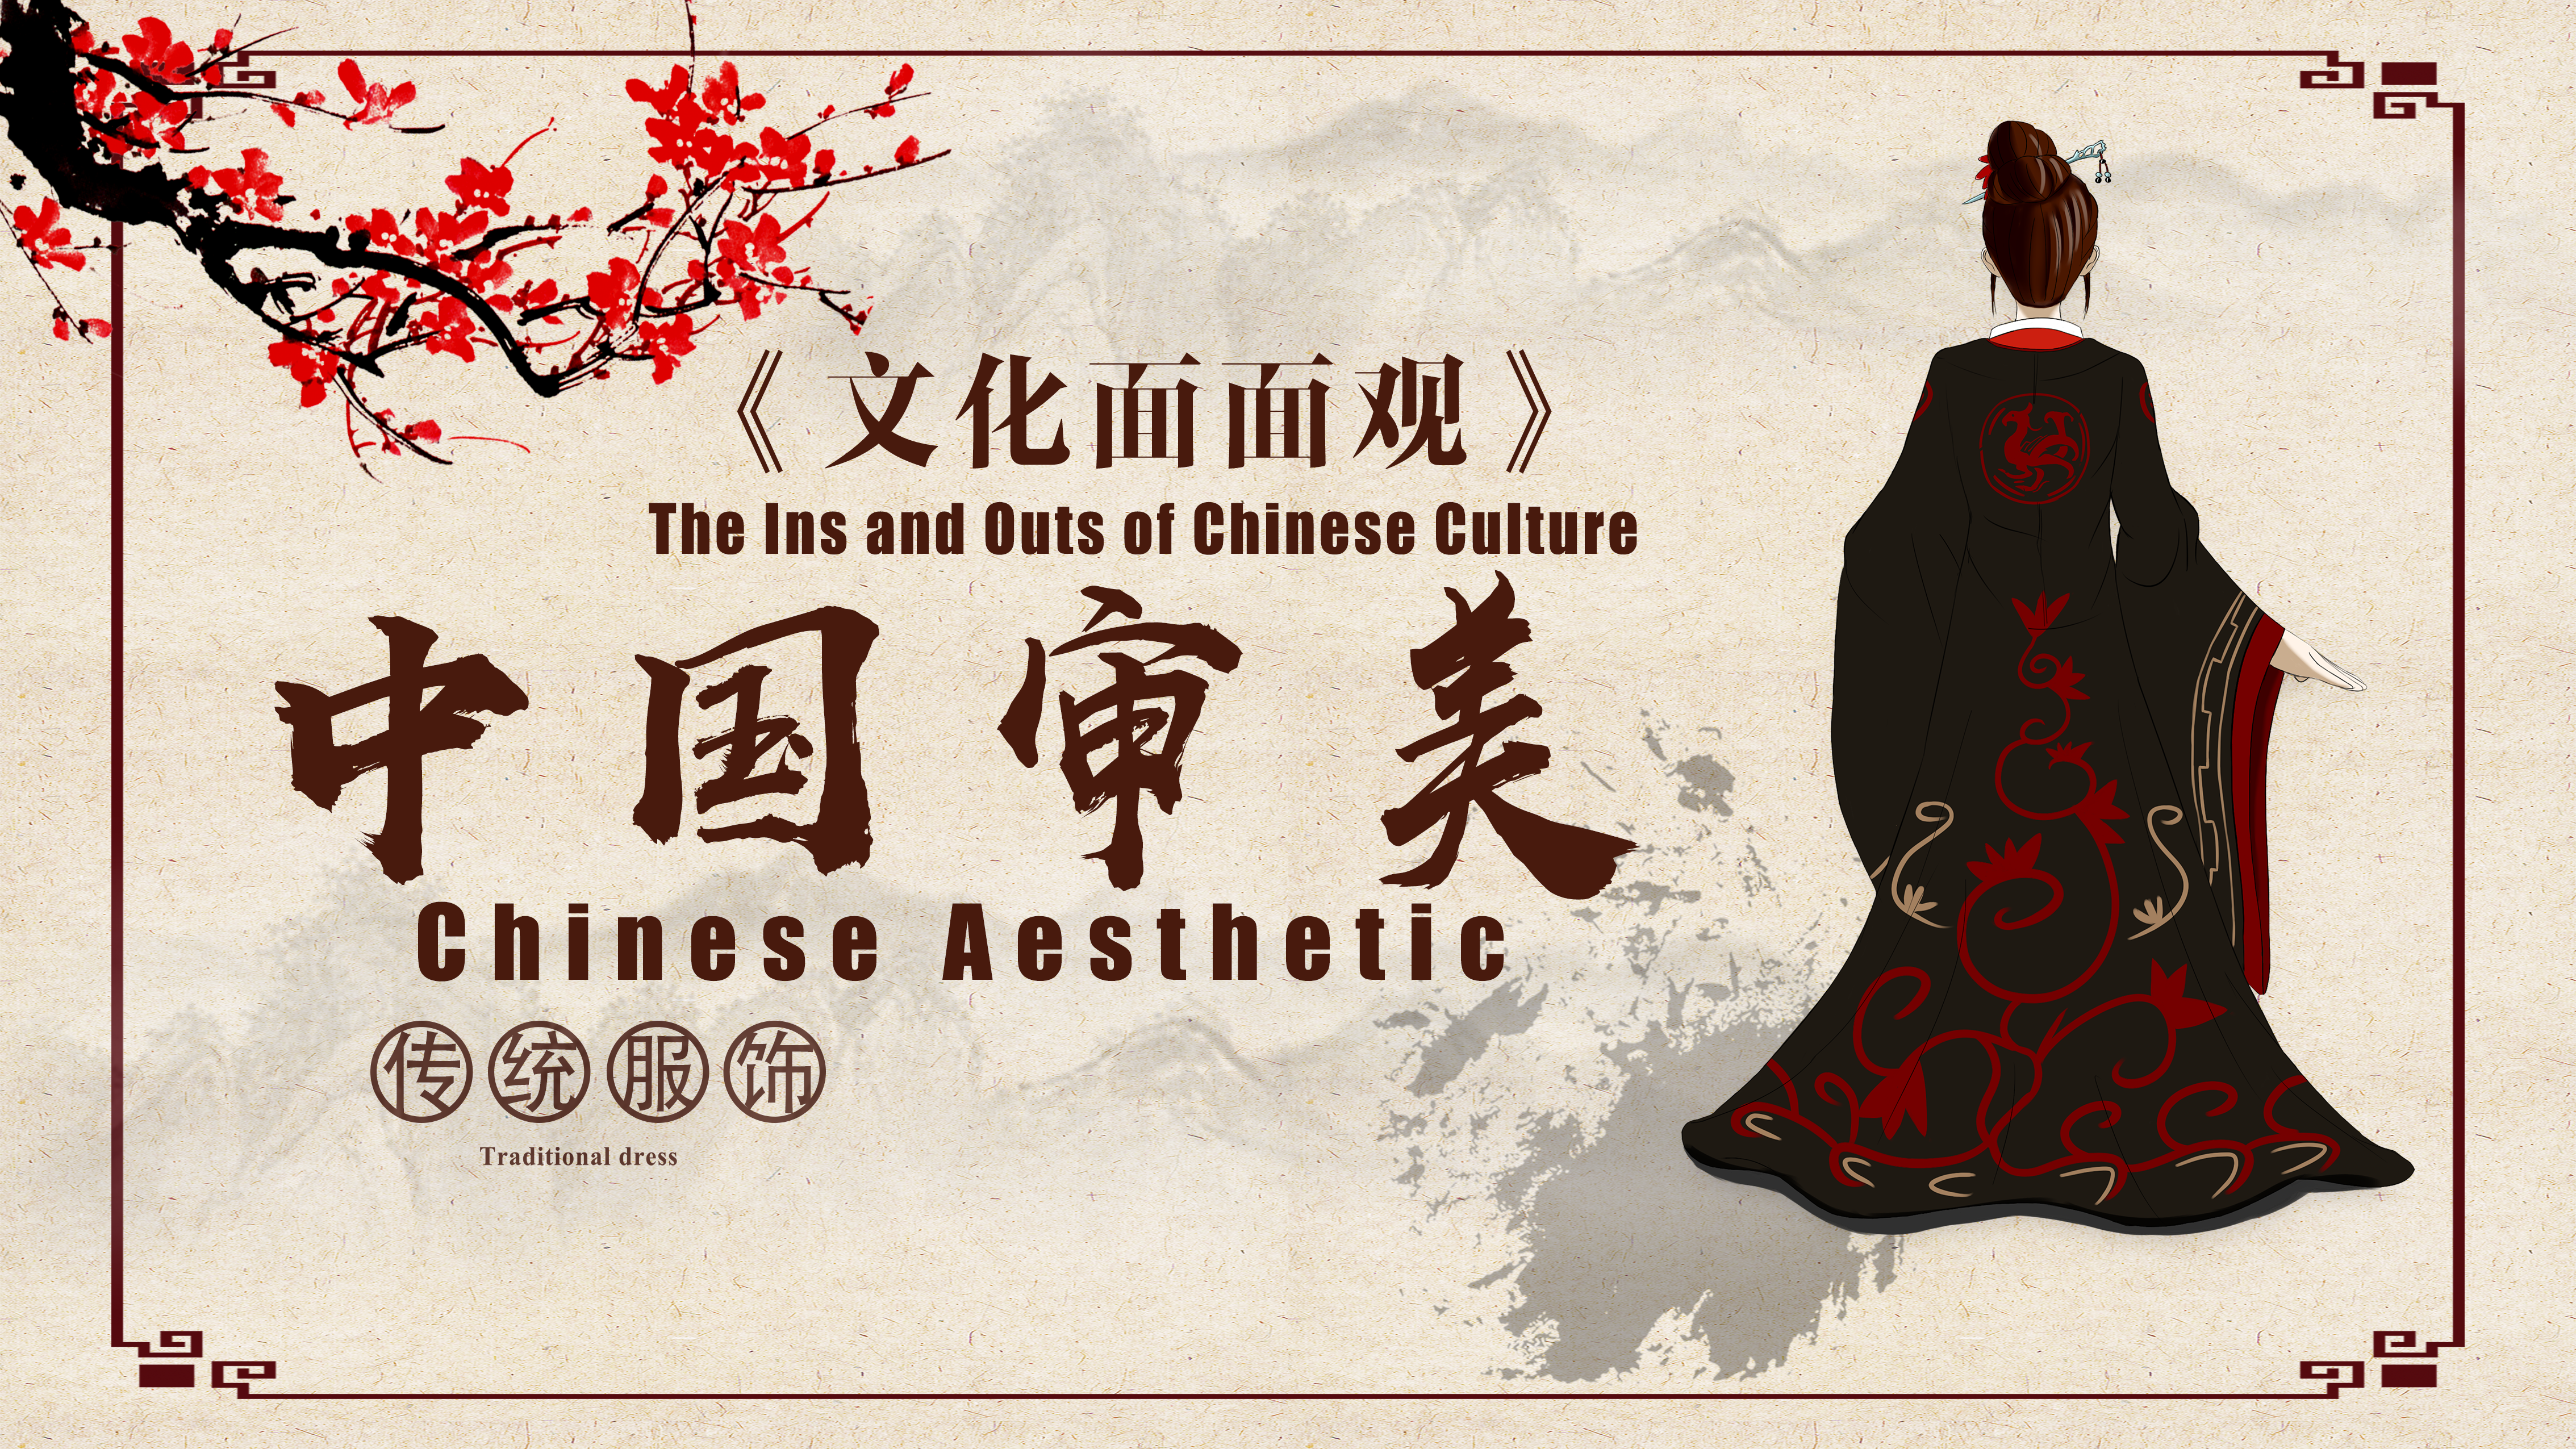 The Ins and Outs of Chinese Culture: Chinese Aesthetic